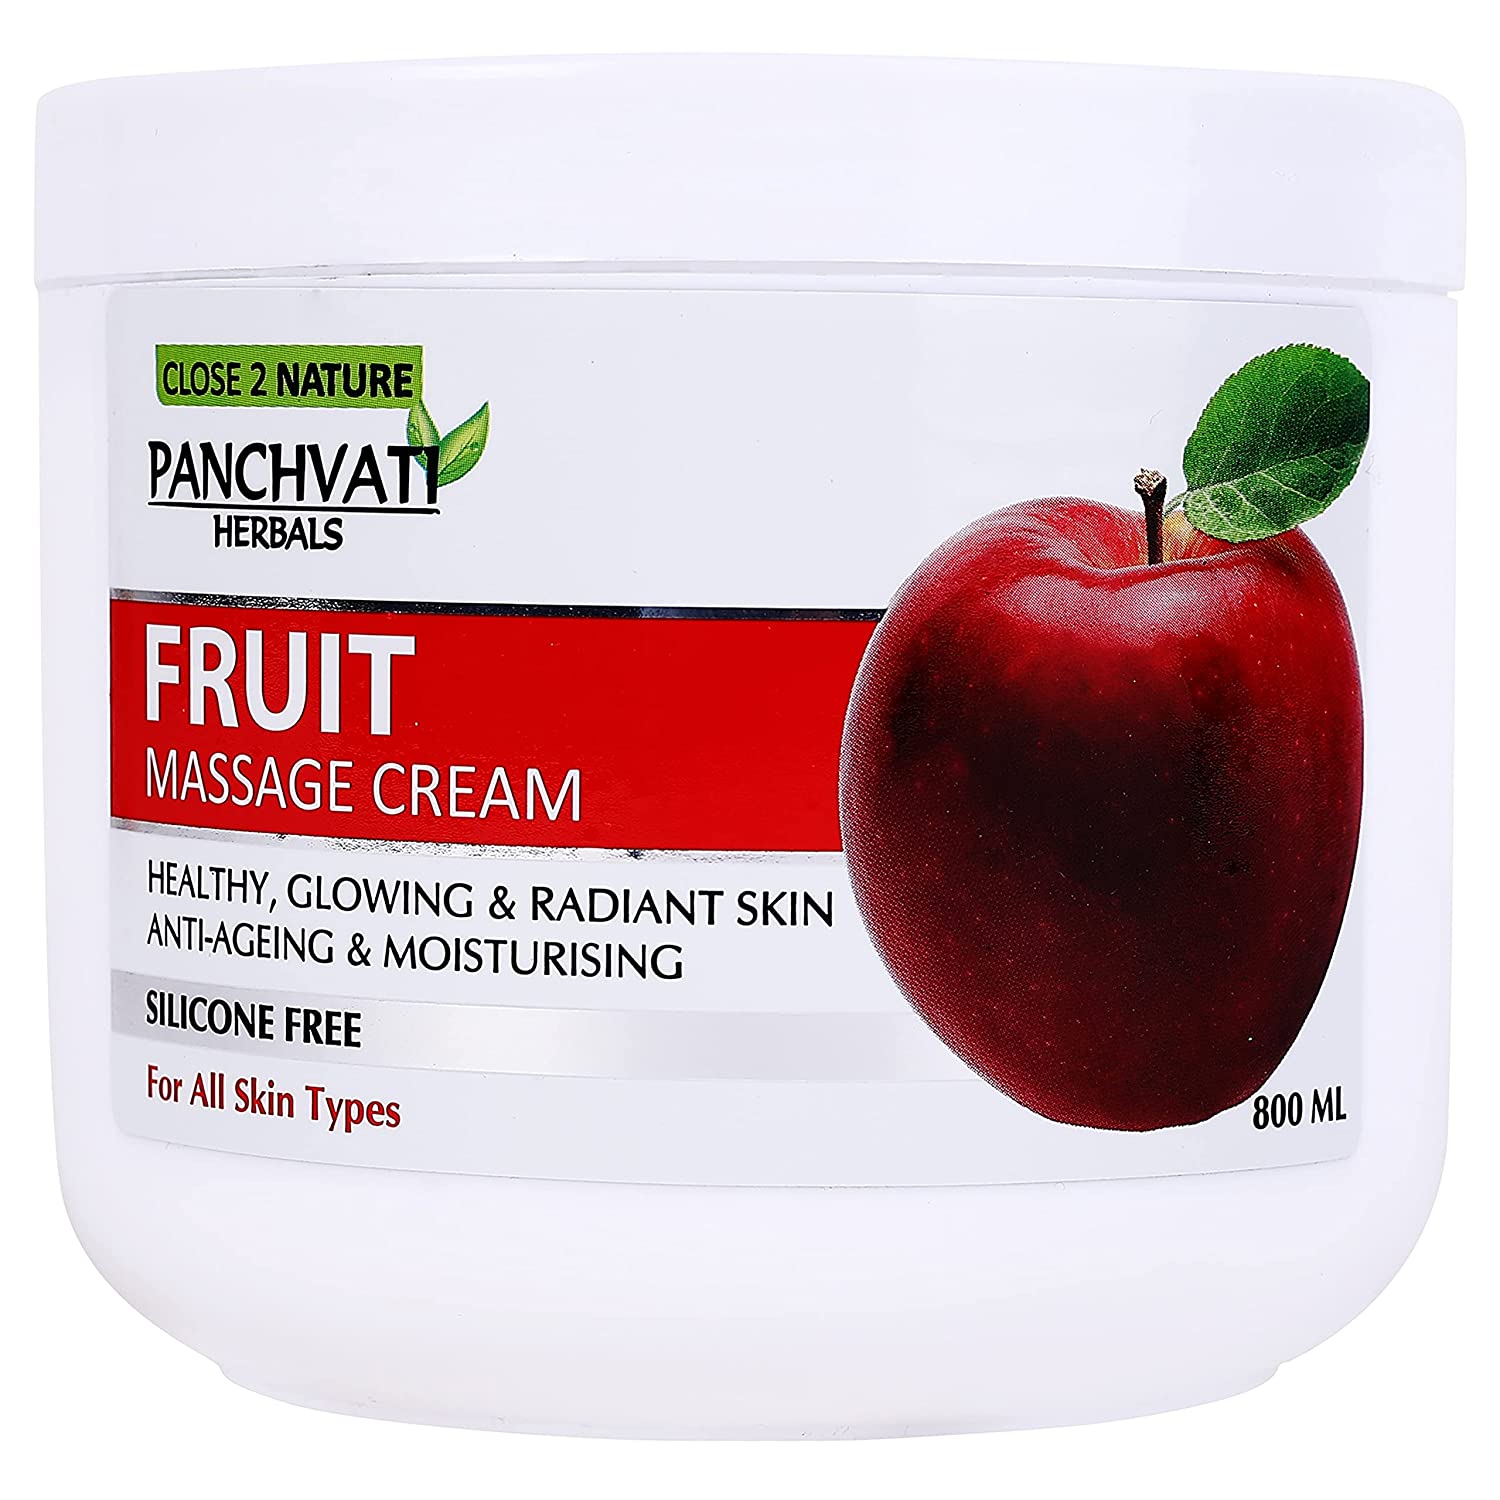 Panchvati Herbals Fruit Massage Cream 800gm For Healthy, Glowing & Radiant Skin, Silicone Free, All Skin Types